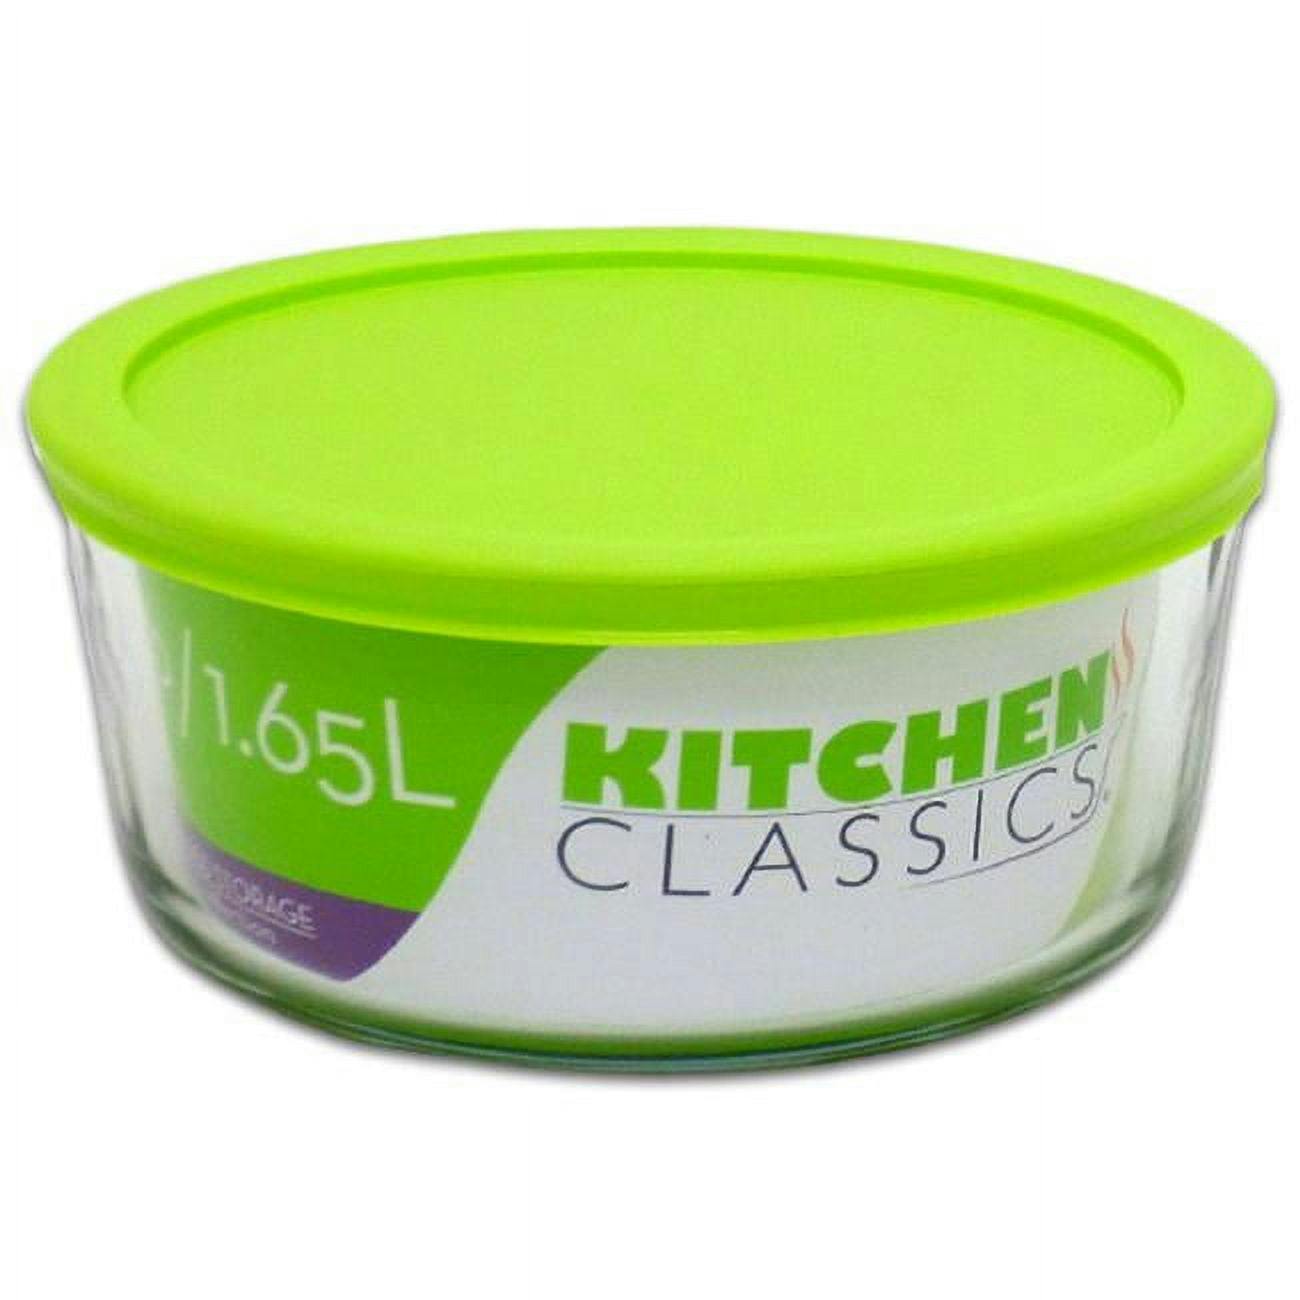 Classic Crystal Clear Tempered Glass Bowl Set with Green Seal Tight Lid - 7 Cups